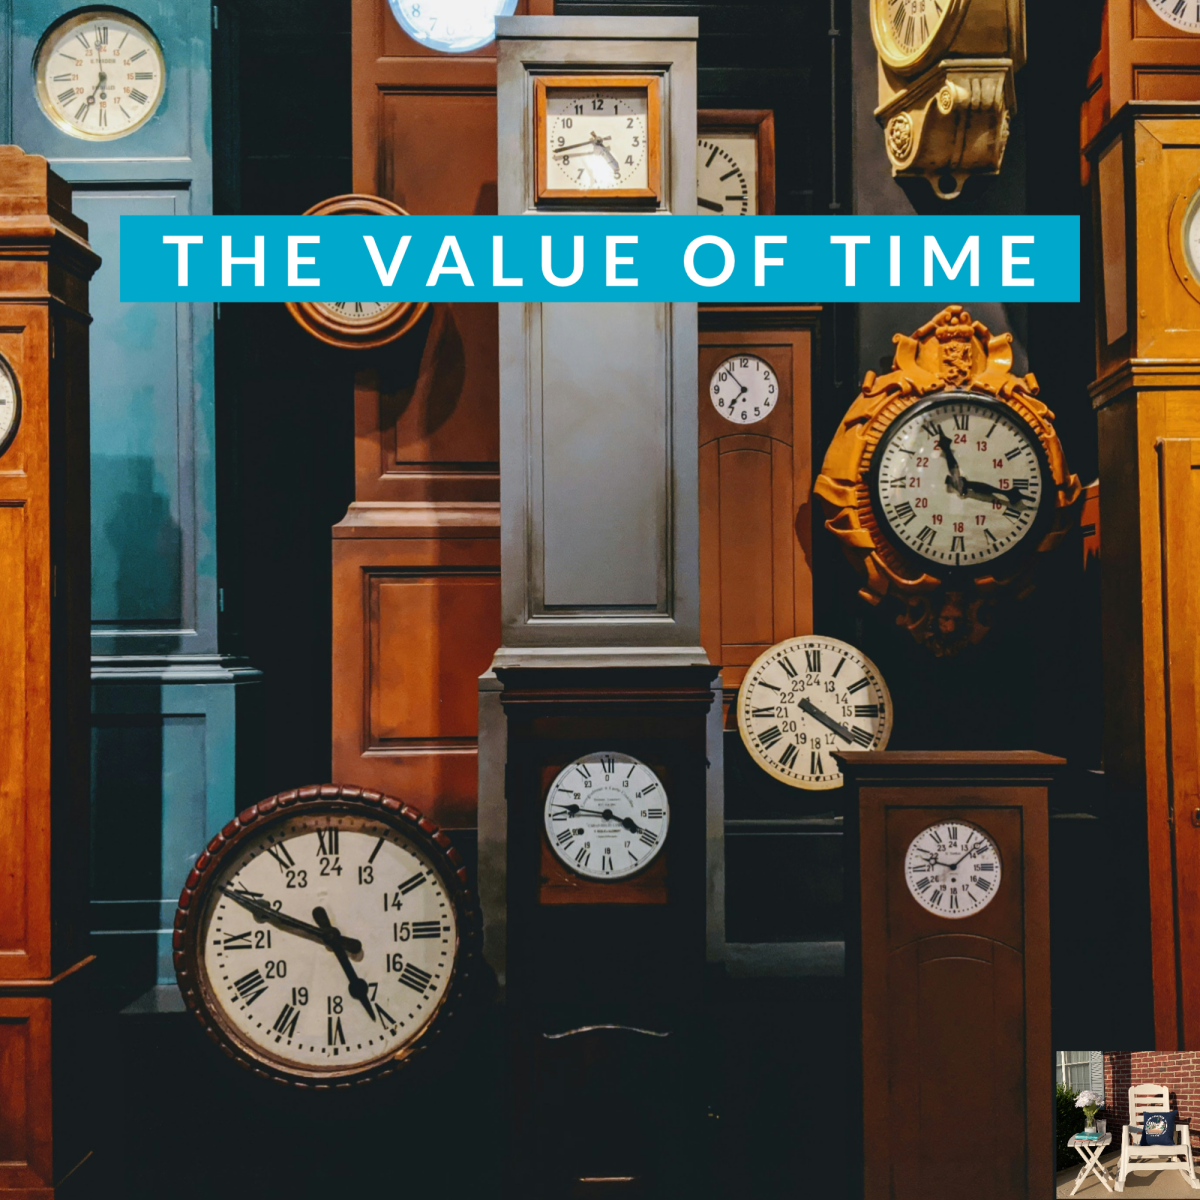 The Value of Time